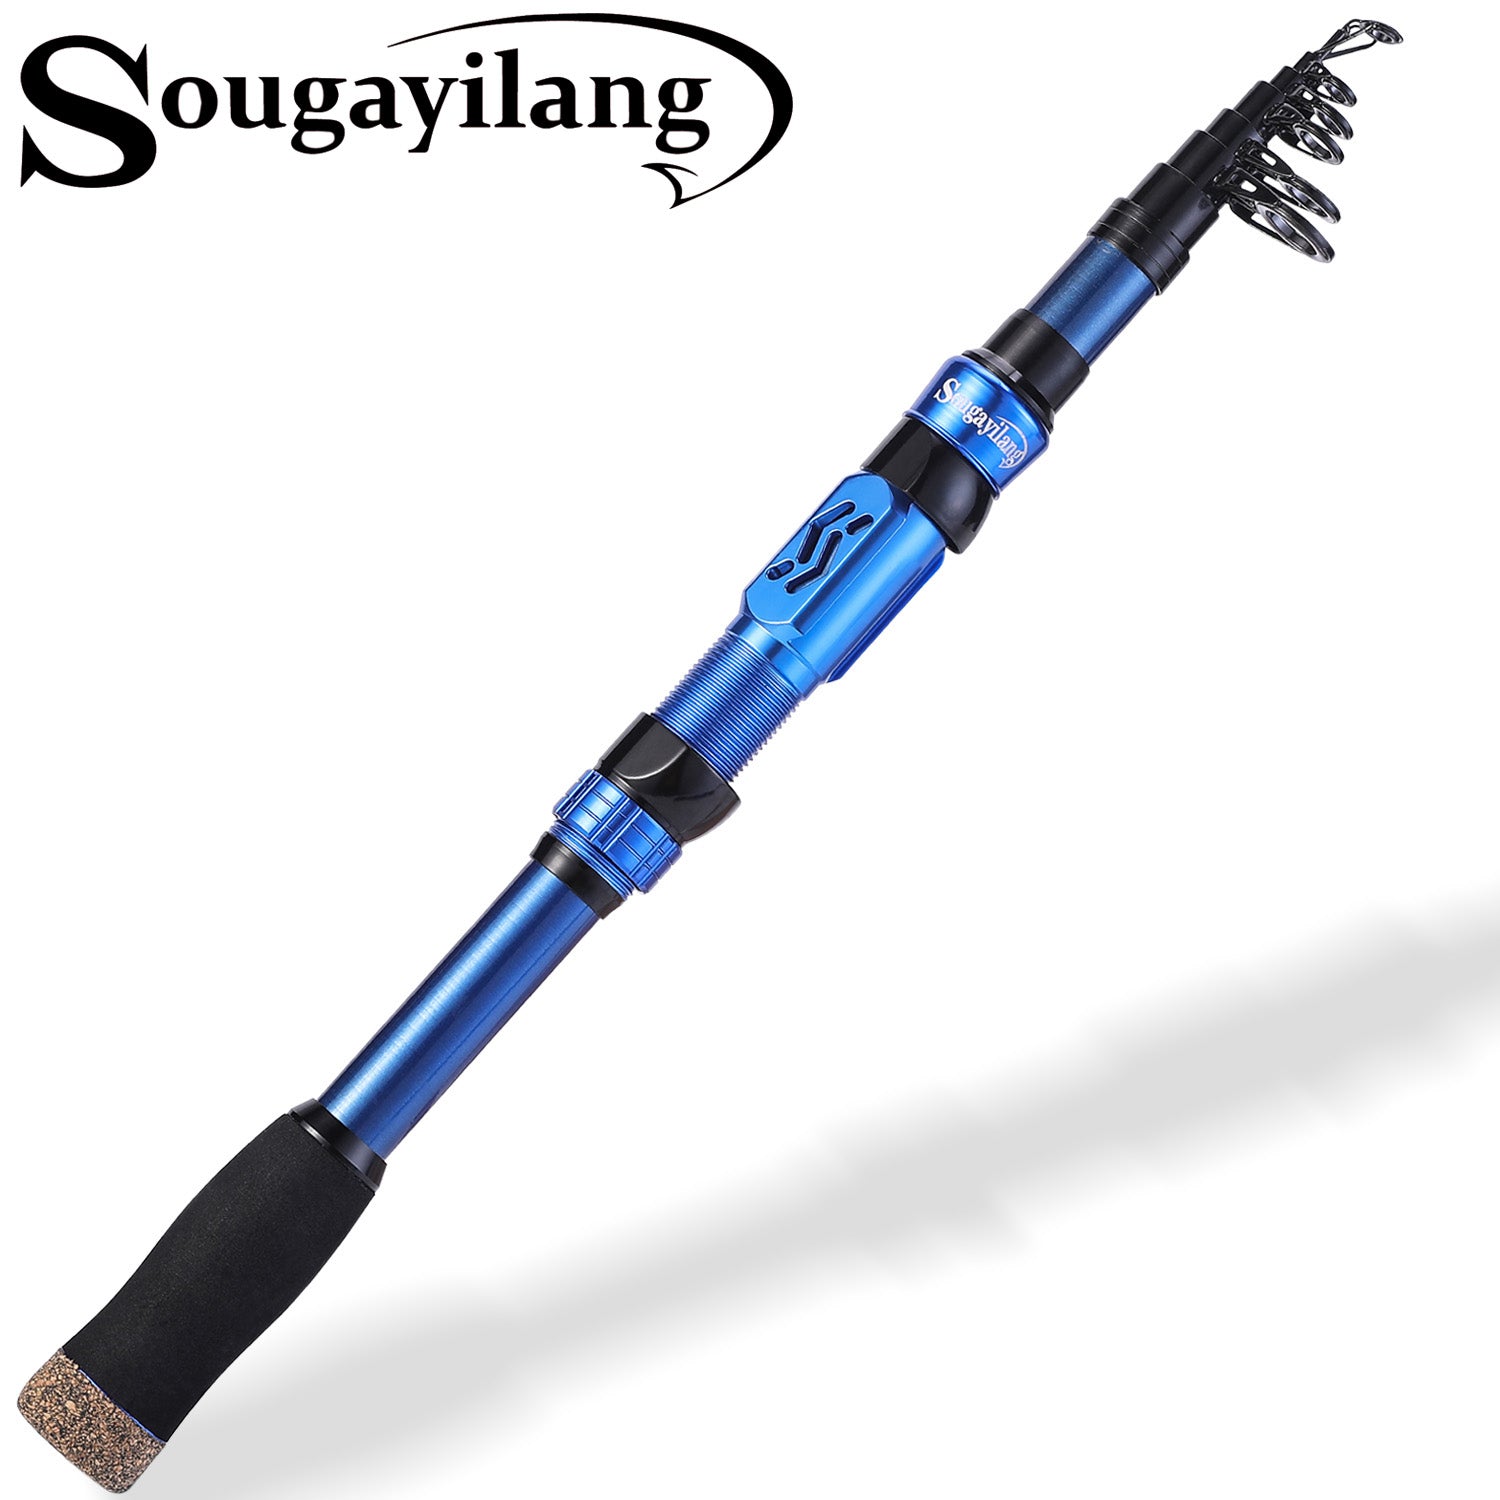 Sougayilang Carp Fishing Rod Carbon Fibre Spinning Rod with Super Smooth  Guide Ring, 6/7 (3M/3.6M) Section Portable Travel Fishing Rod for Saltwater